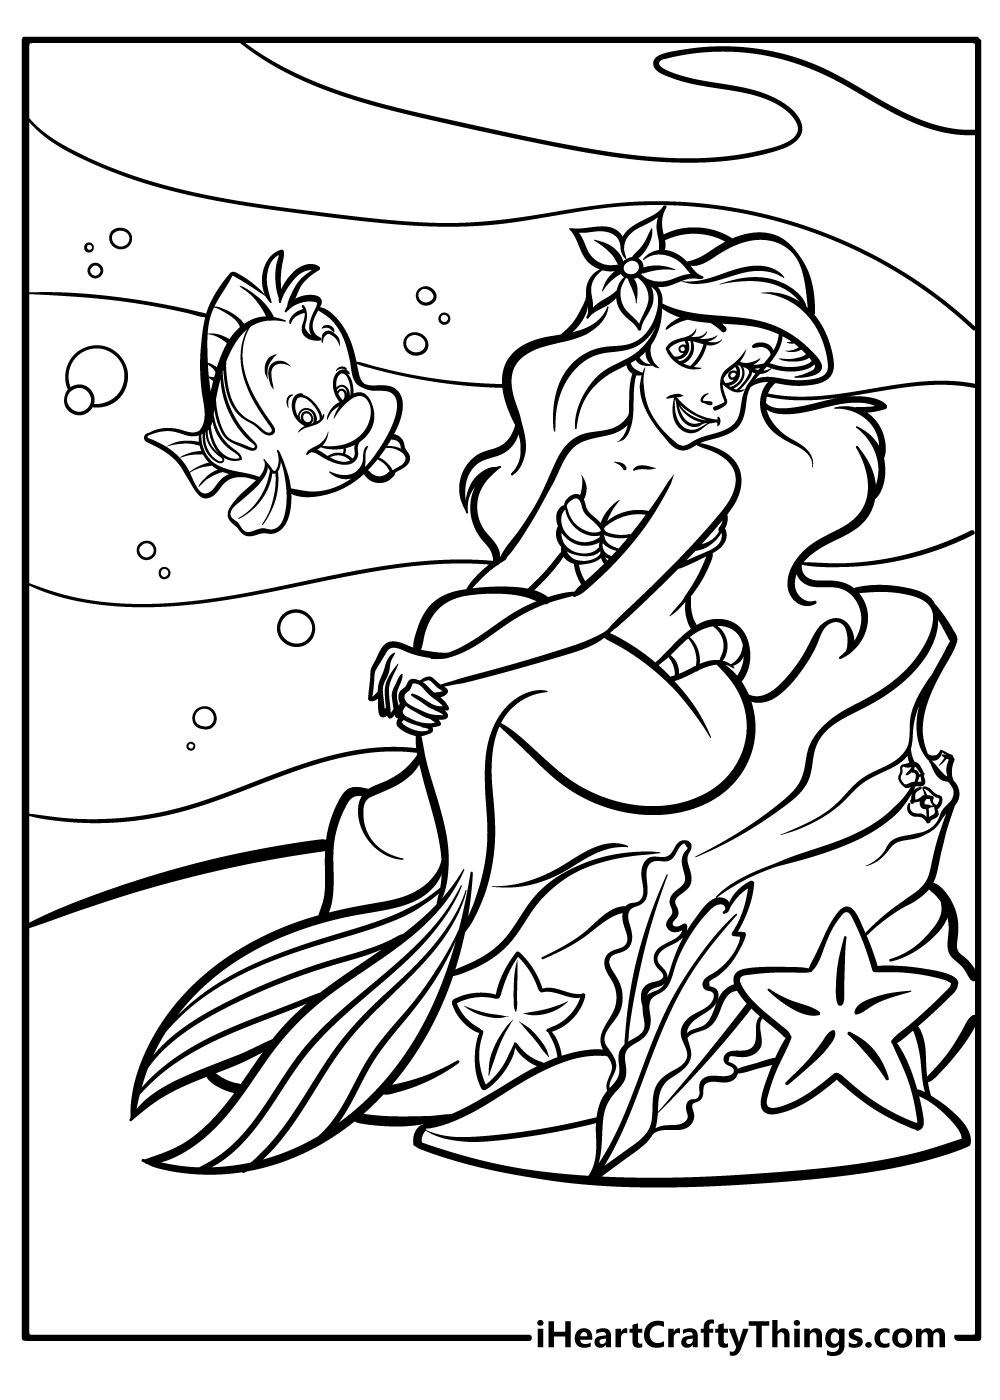 Disney Ariel Coloring Pages free printable for preschoolers